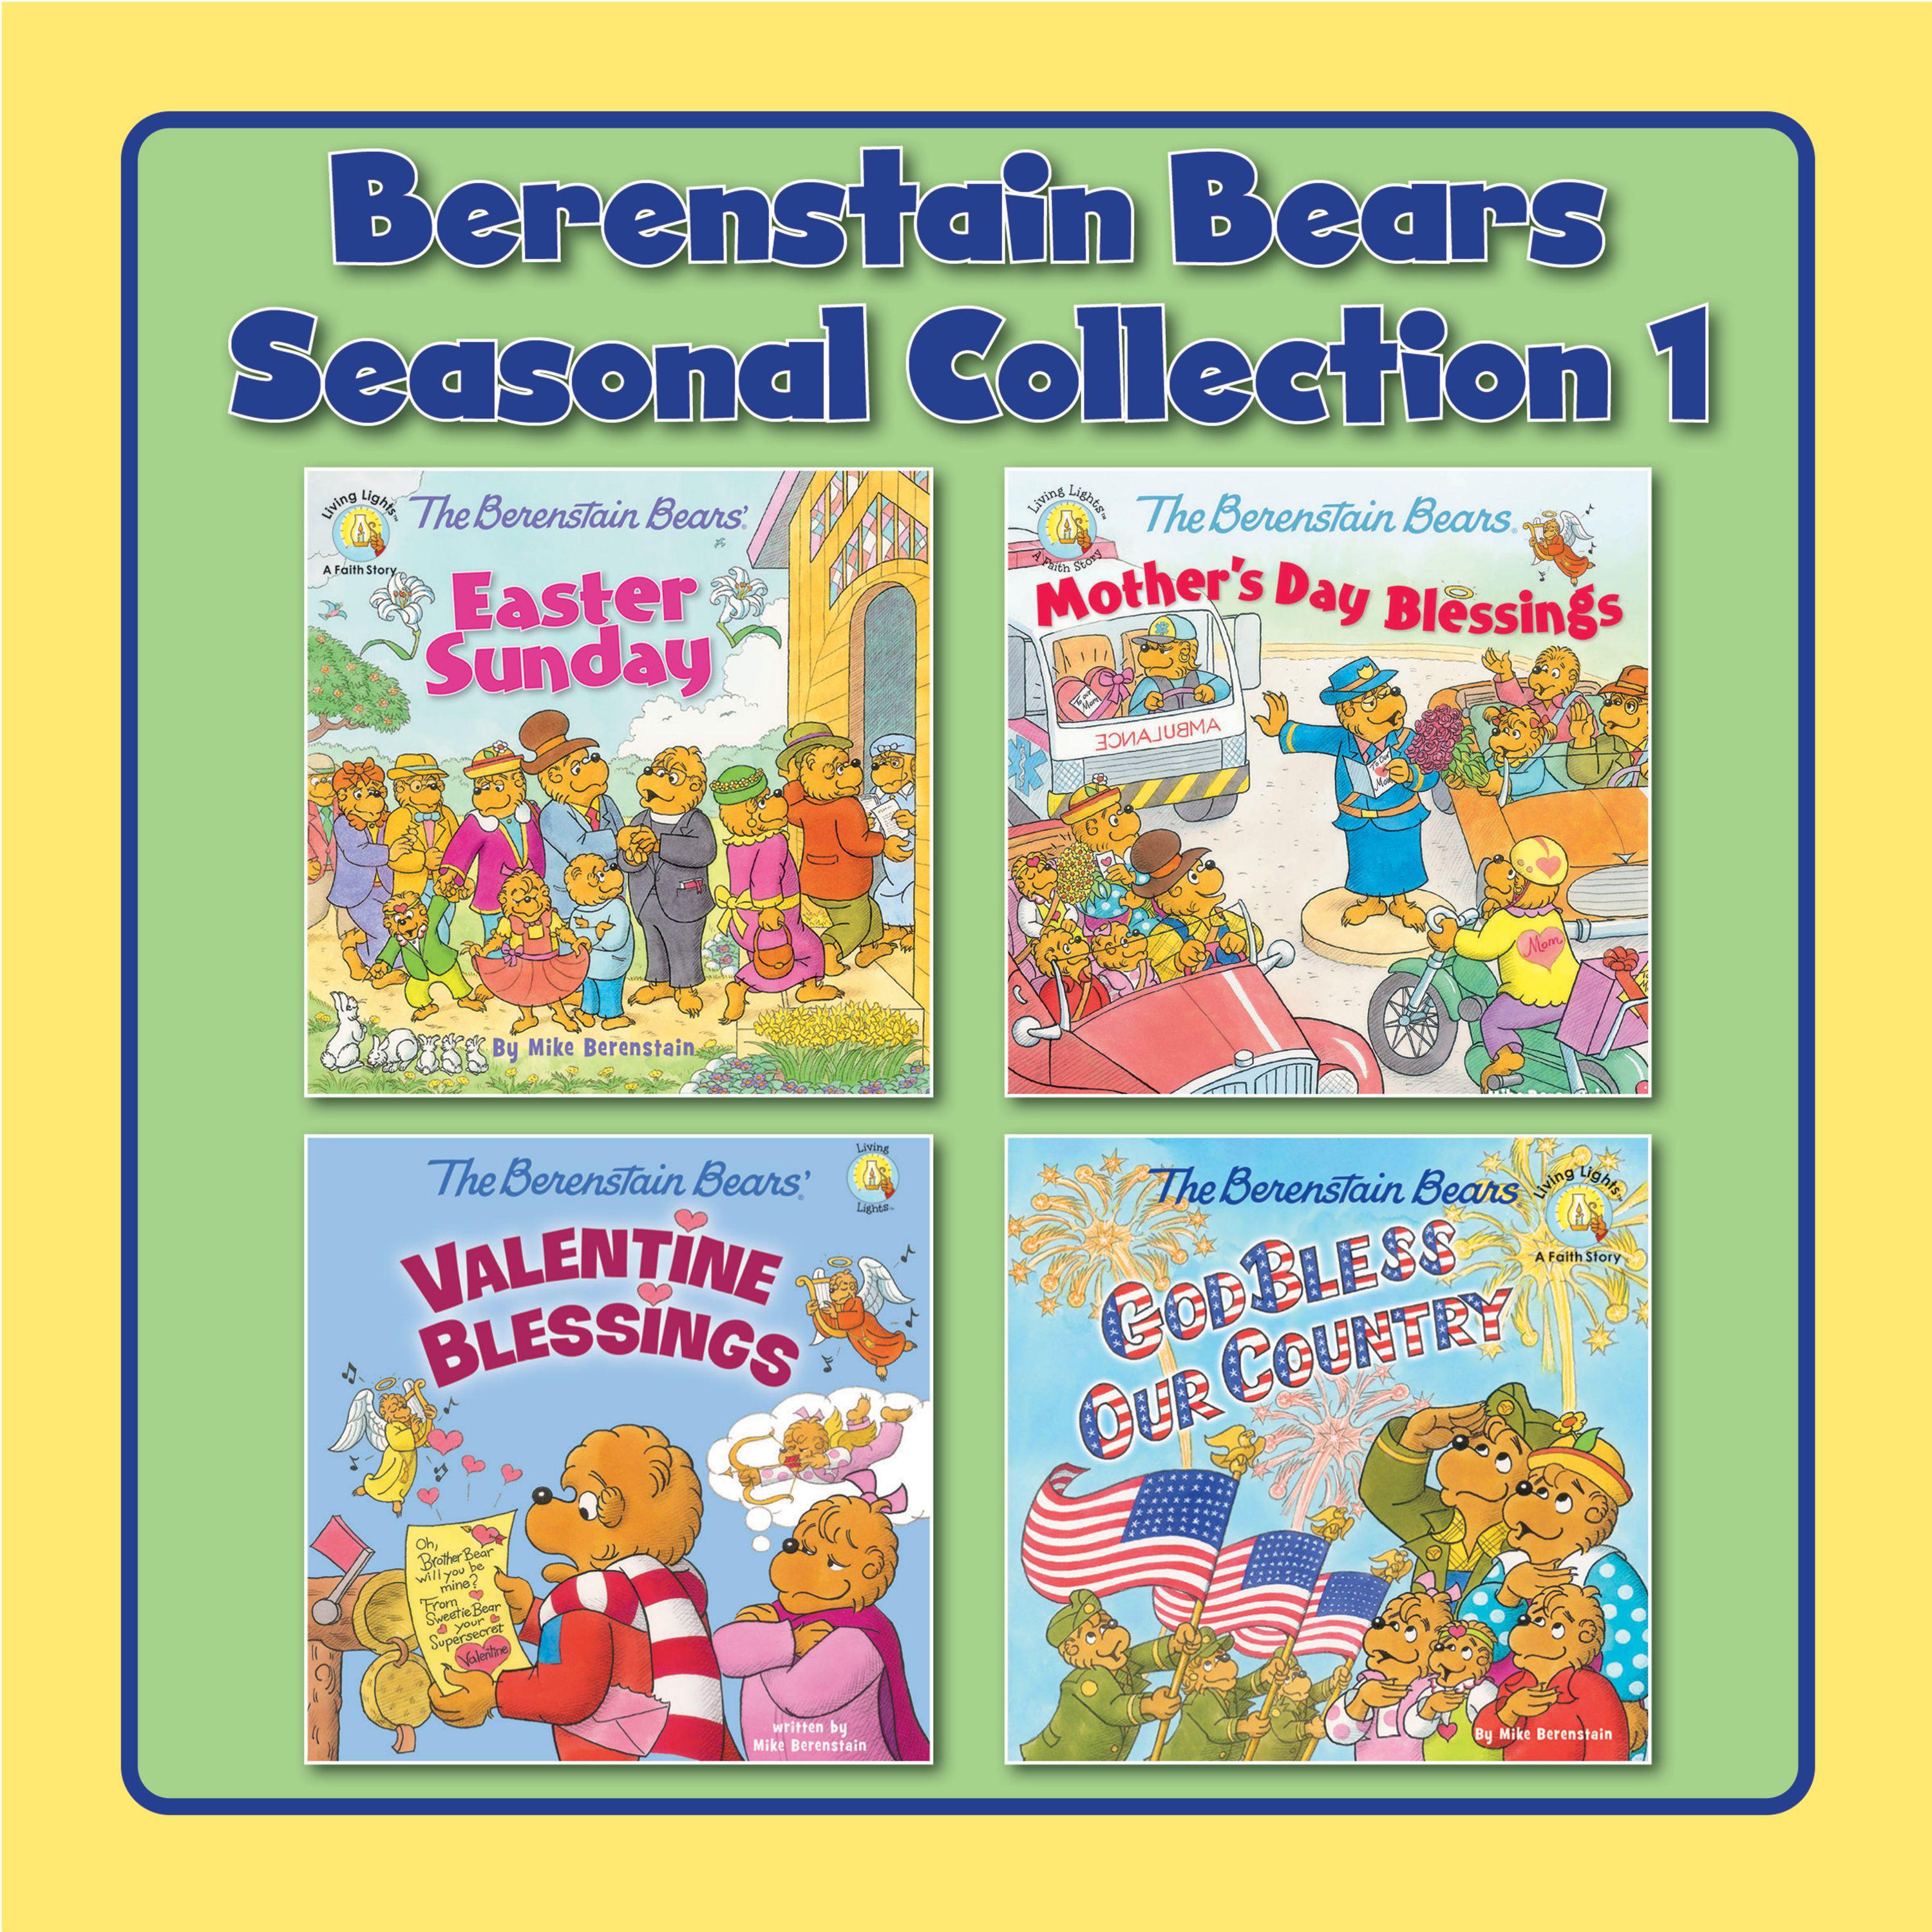 The Berenstain Bears Seasonal Collection 1 Audiobook Listen Instantly!